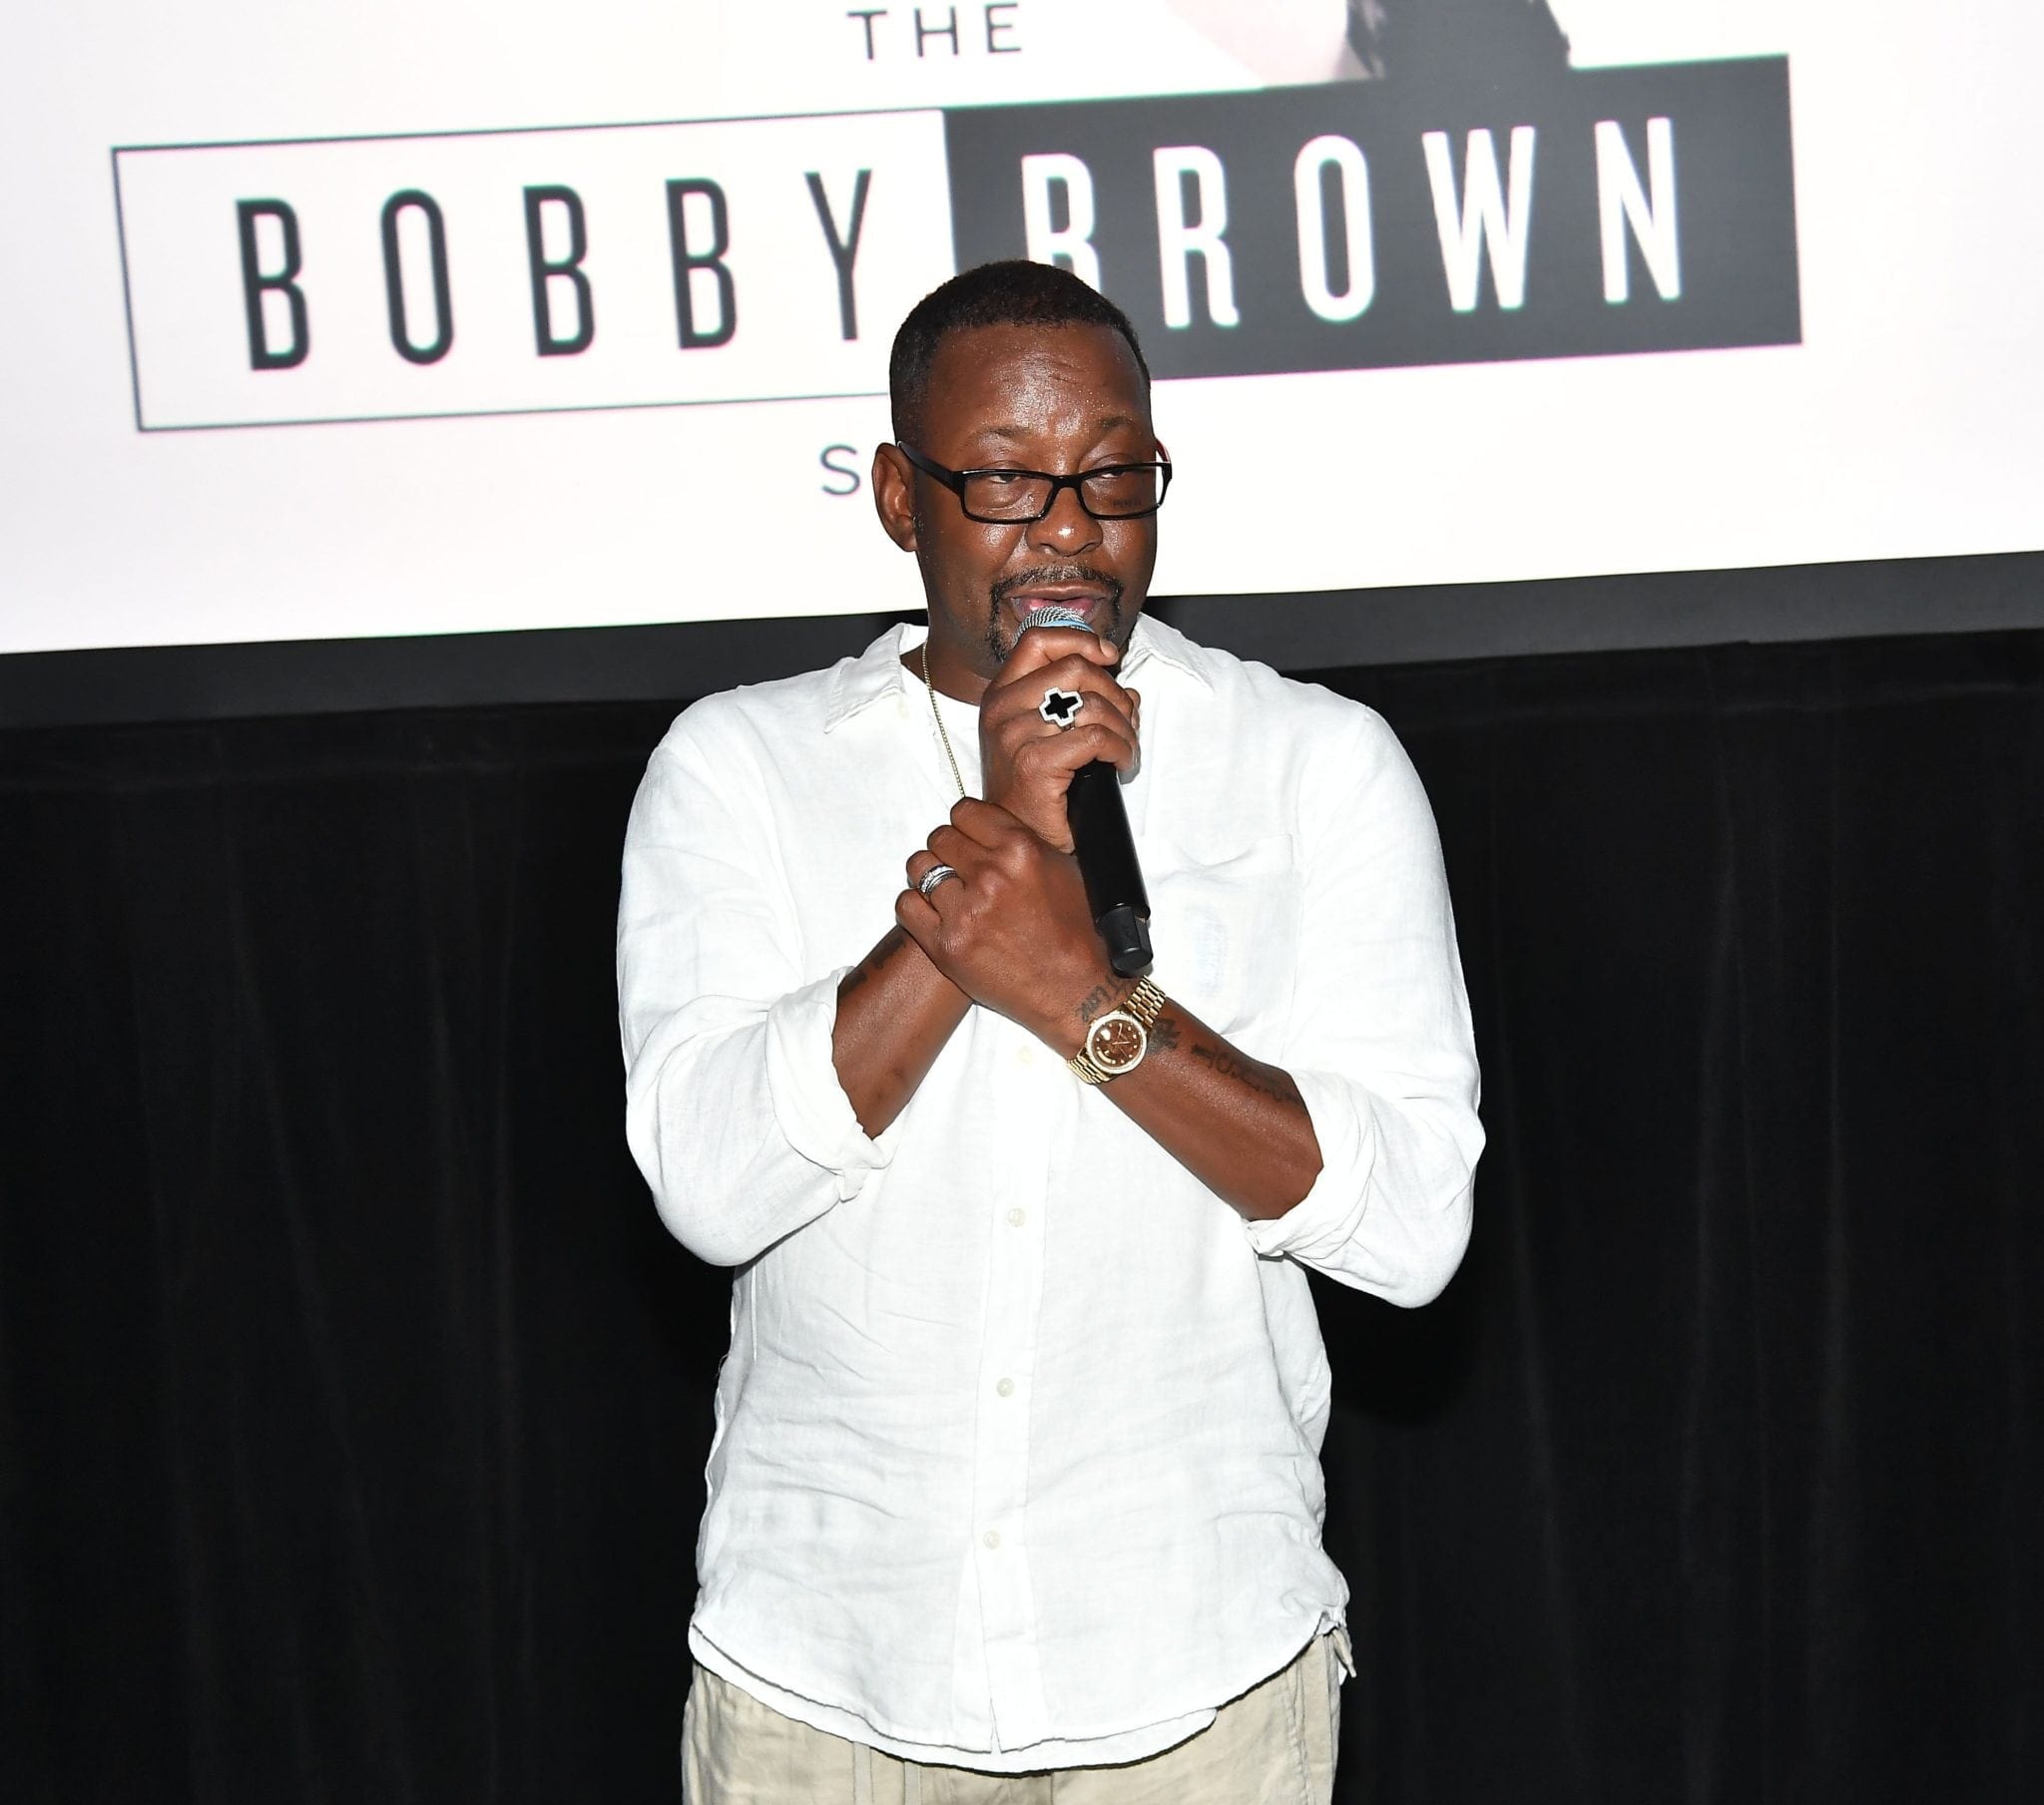 The Epic Bobby Brown Story